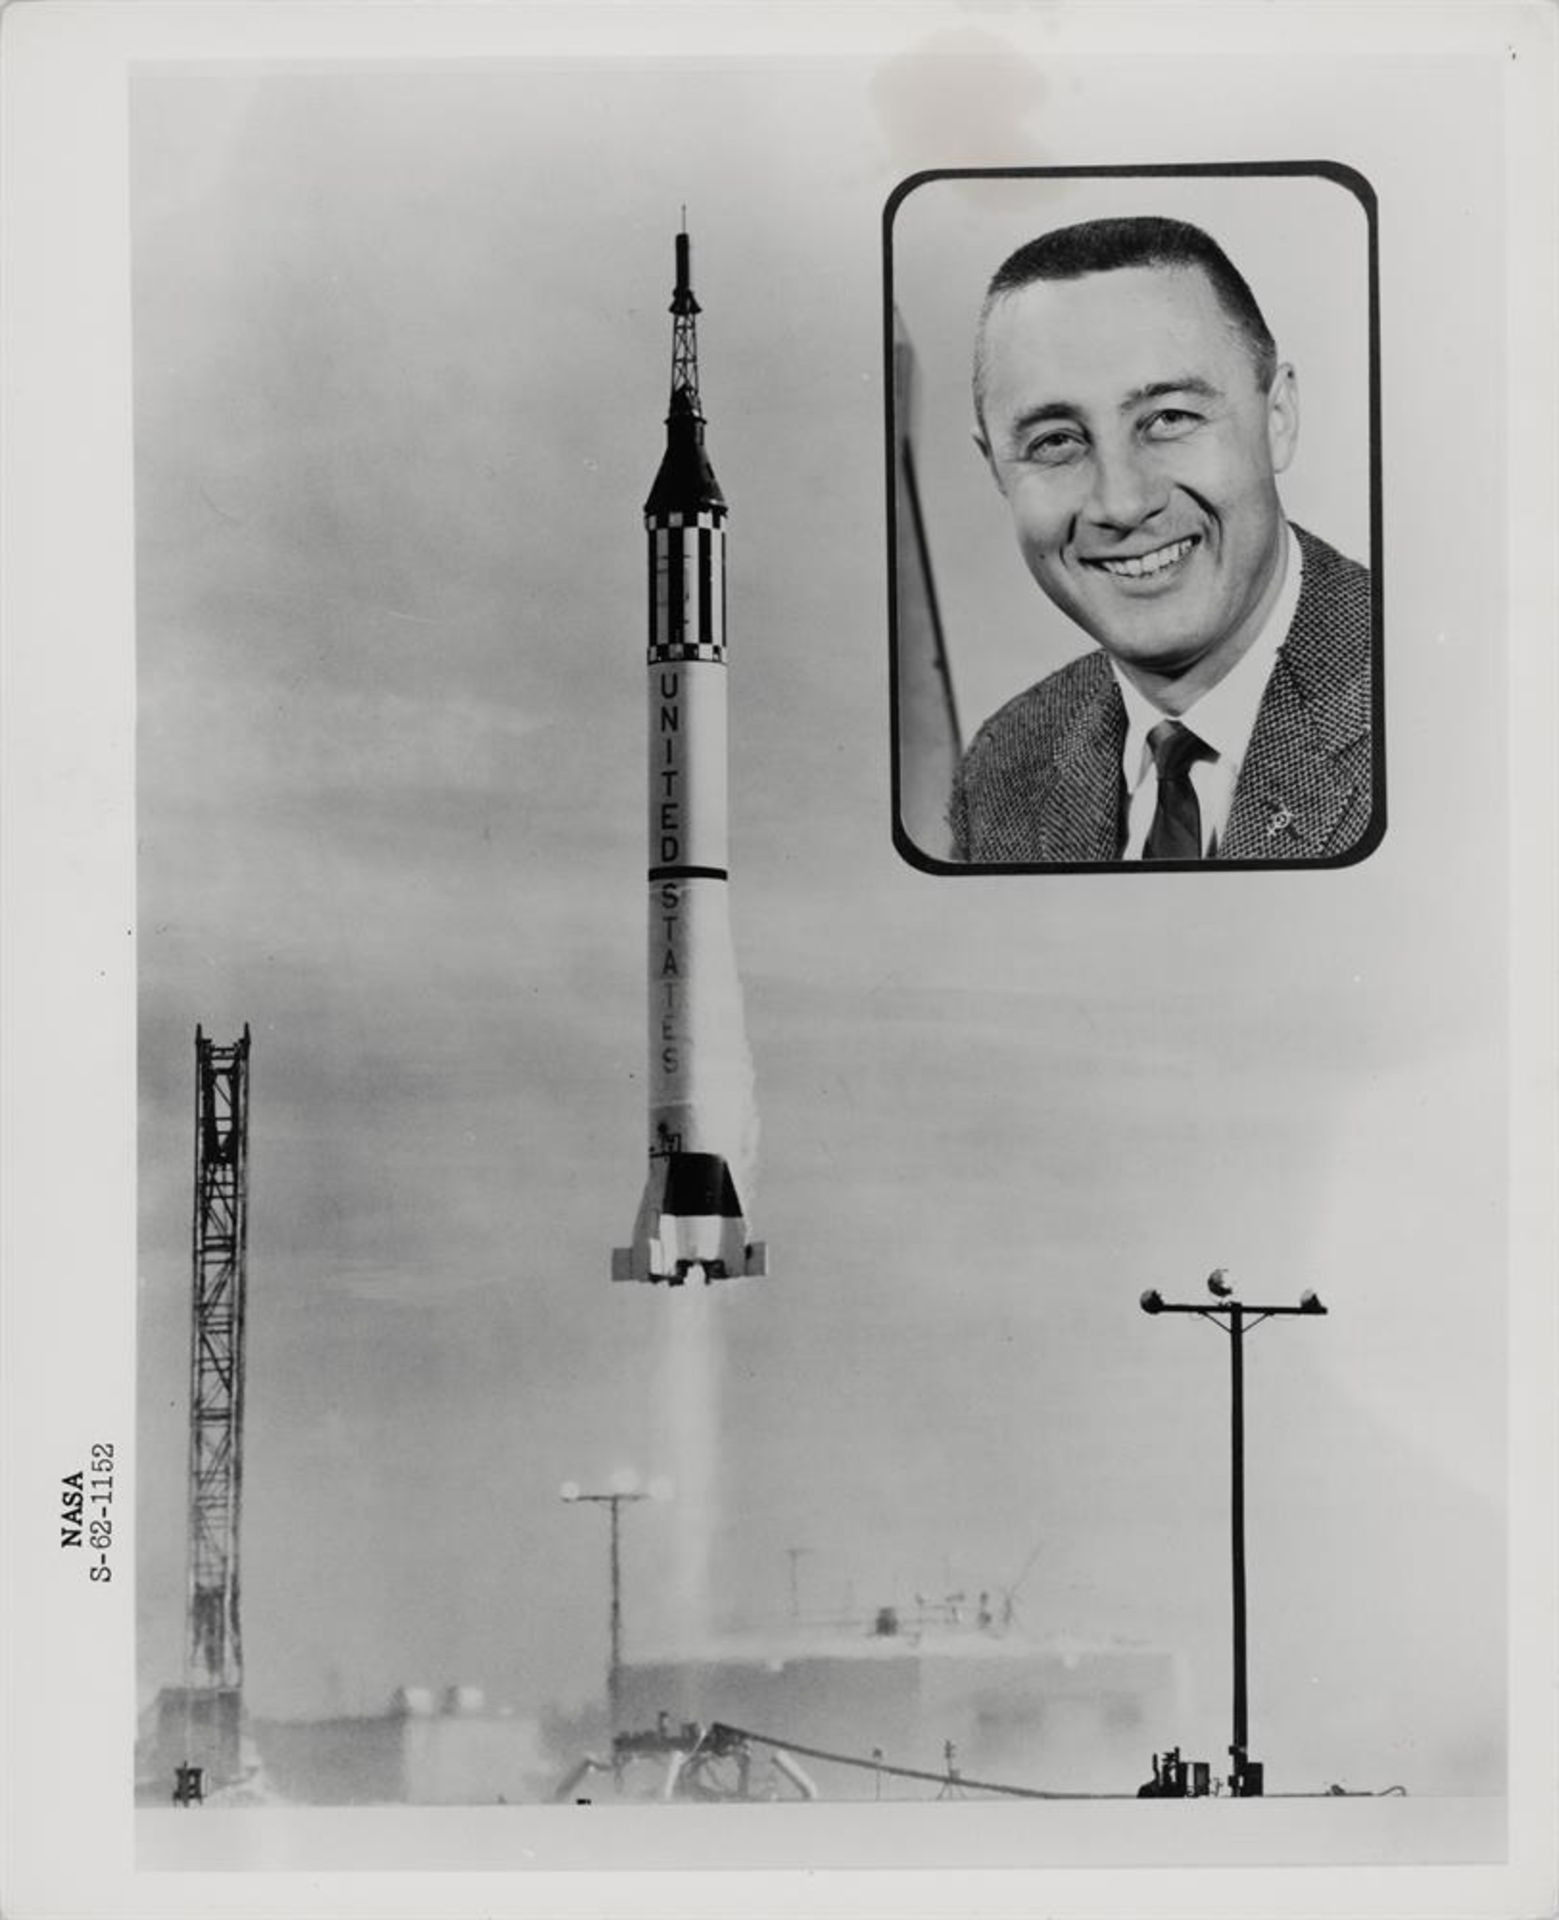 Gus Grissom onboard Liberty 7, 2nd U.S. suborbital mission (2 views), Mercury-Redstone 4, July 1961 - Image 4 of 5